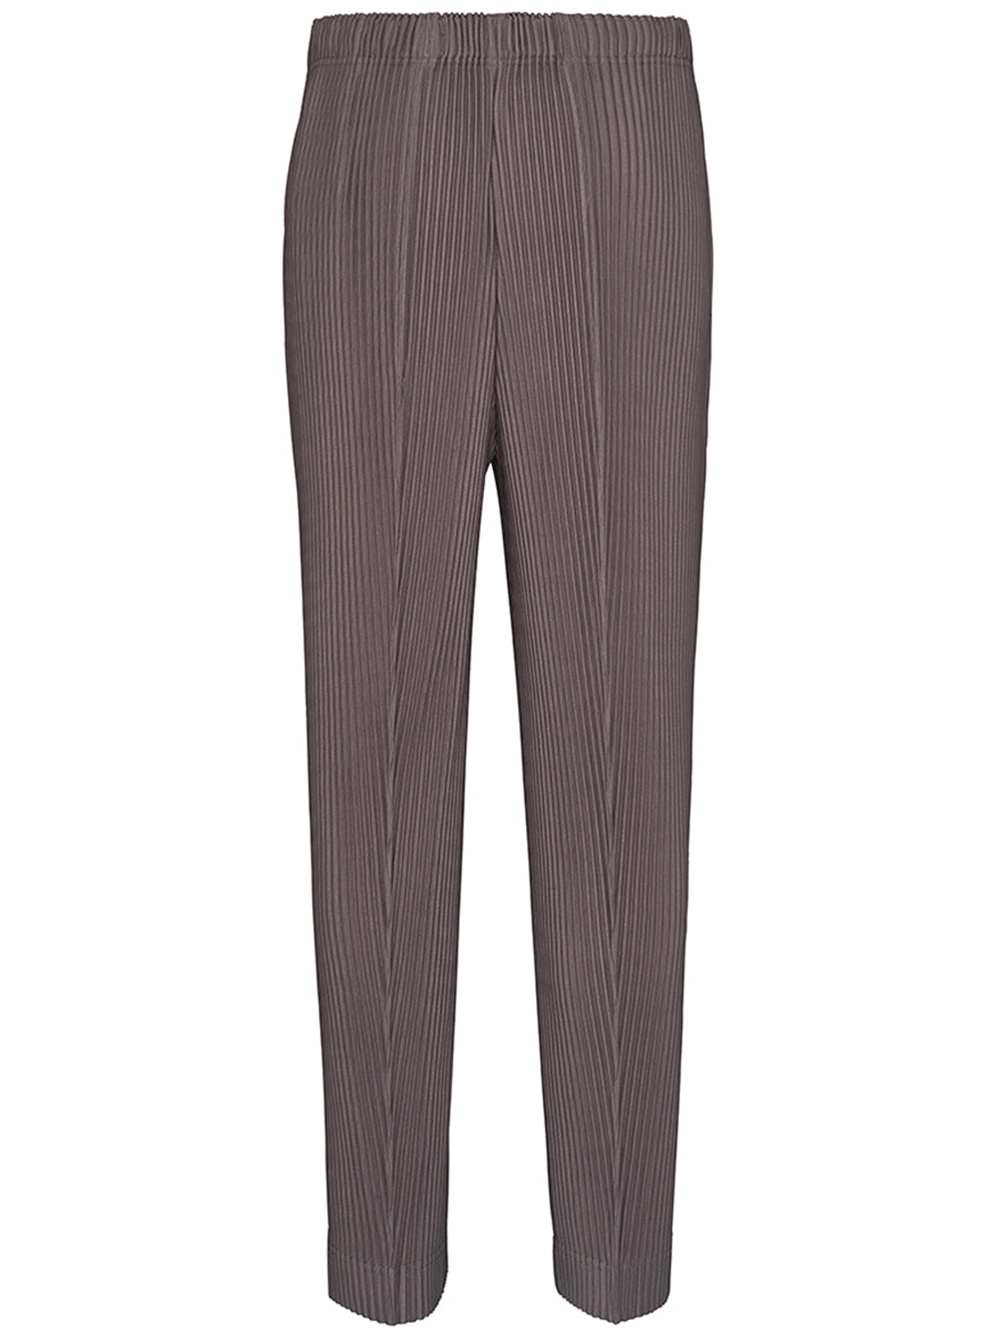 HOMME-PLISSE-ISSEY-MIYAKE-MONTHLY-COLORS-NOVEMBER-Pants-Bronze-Gray-2